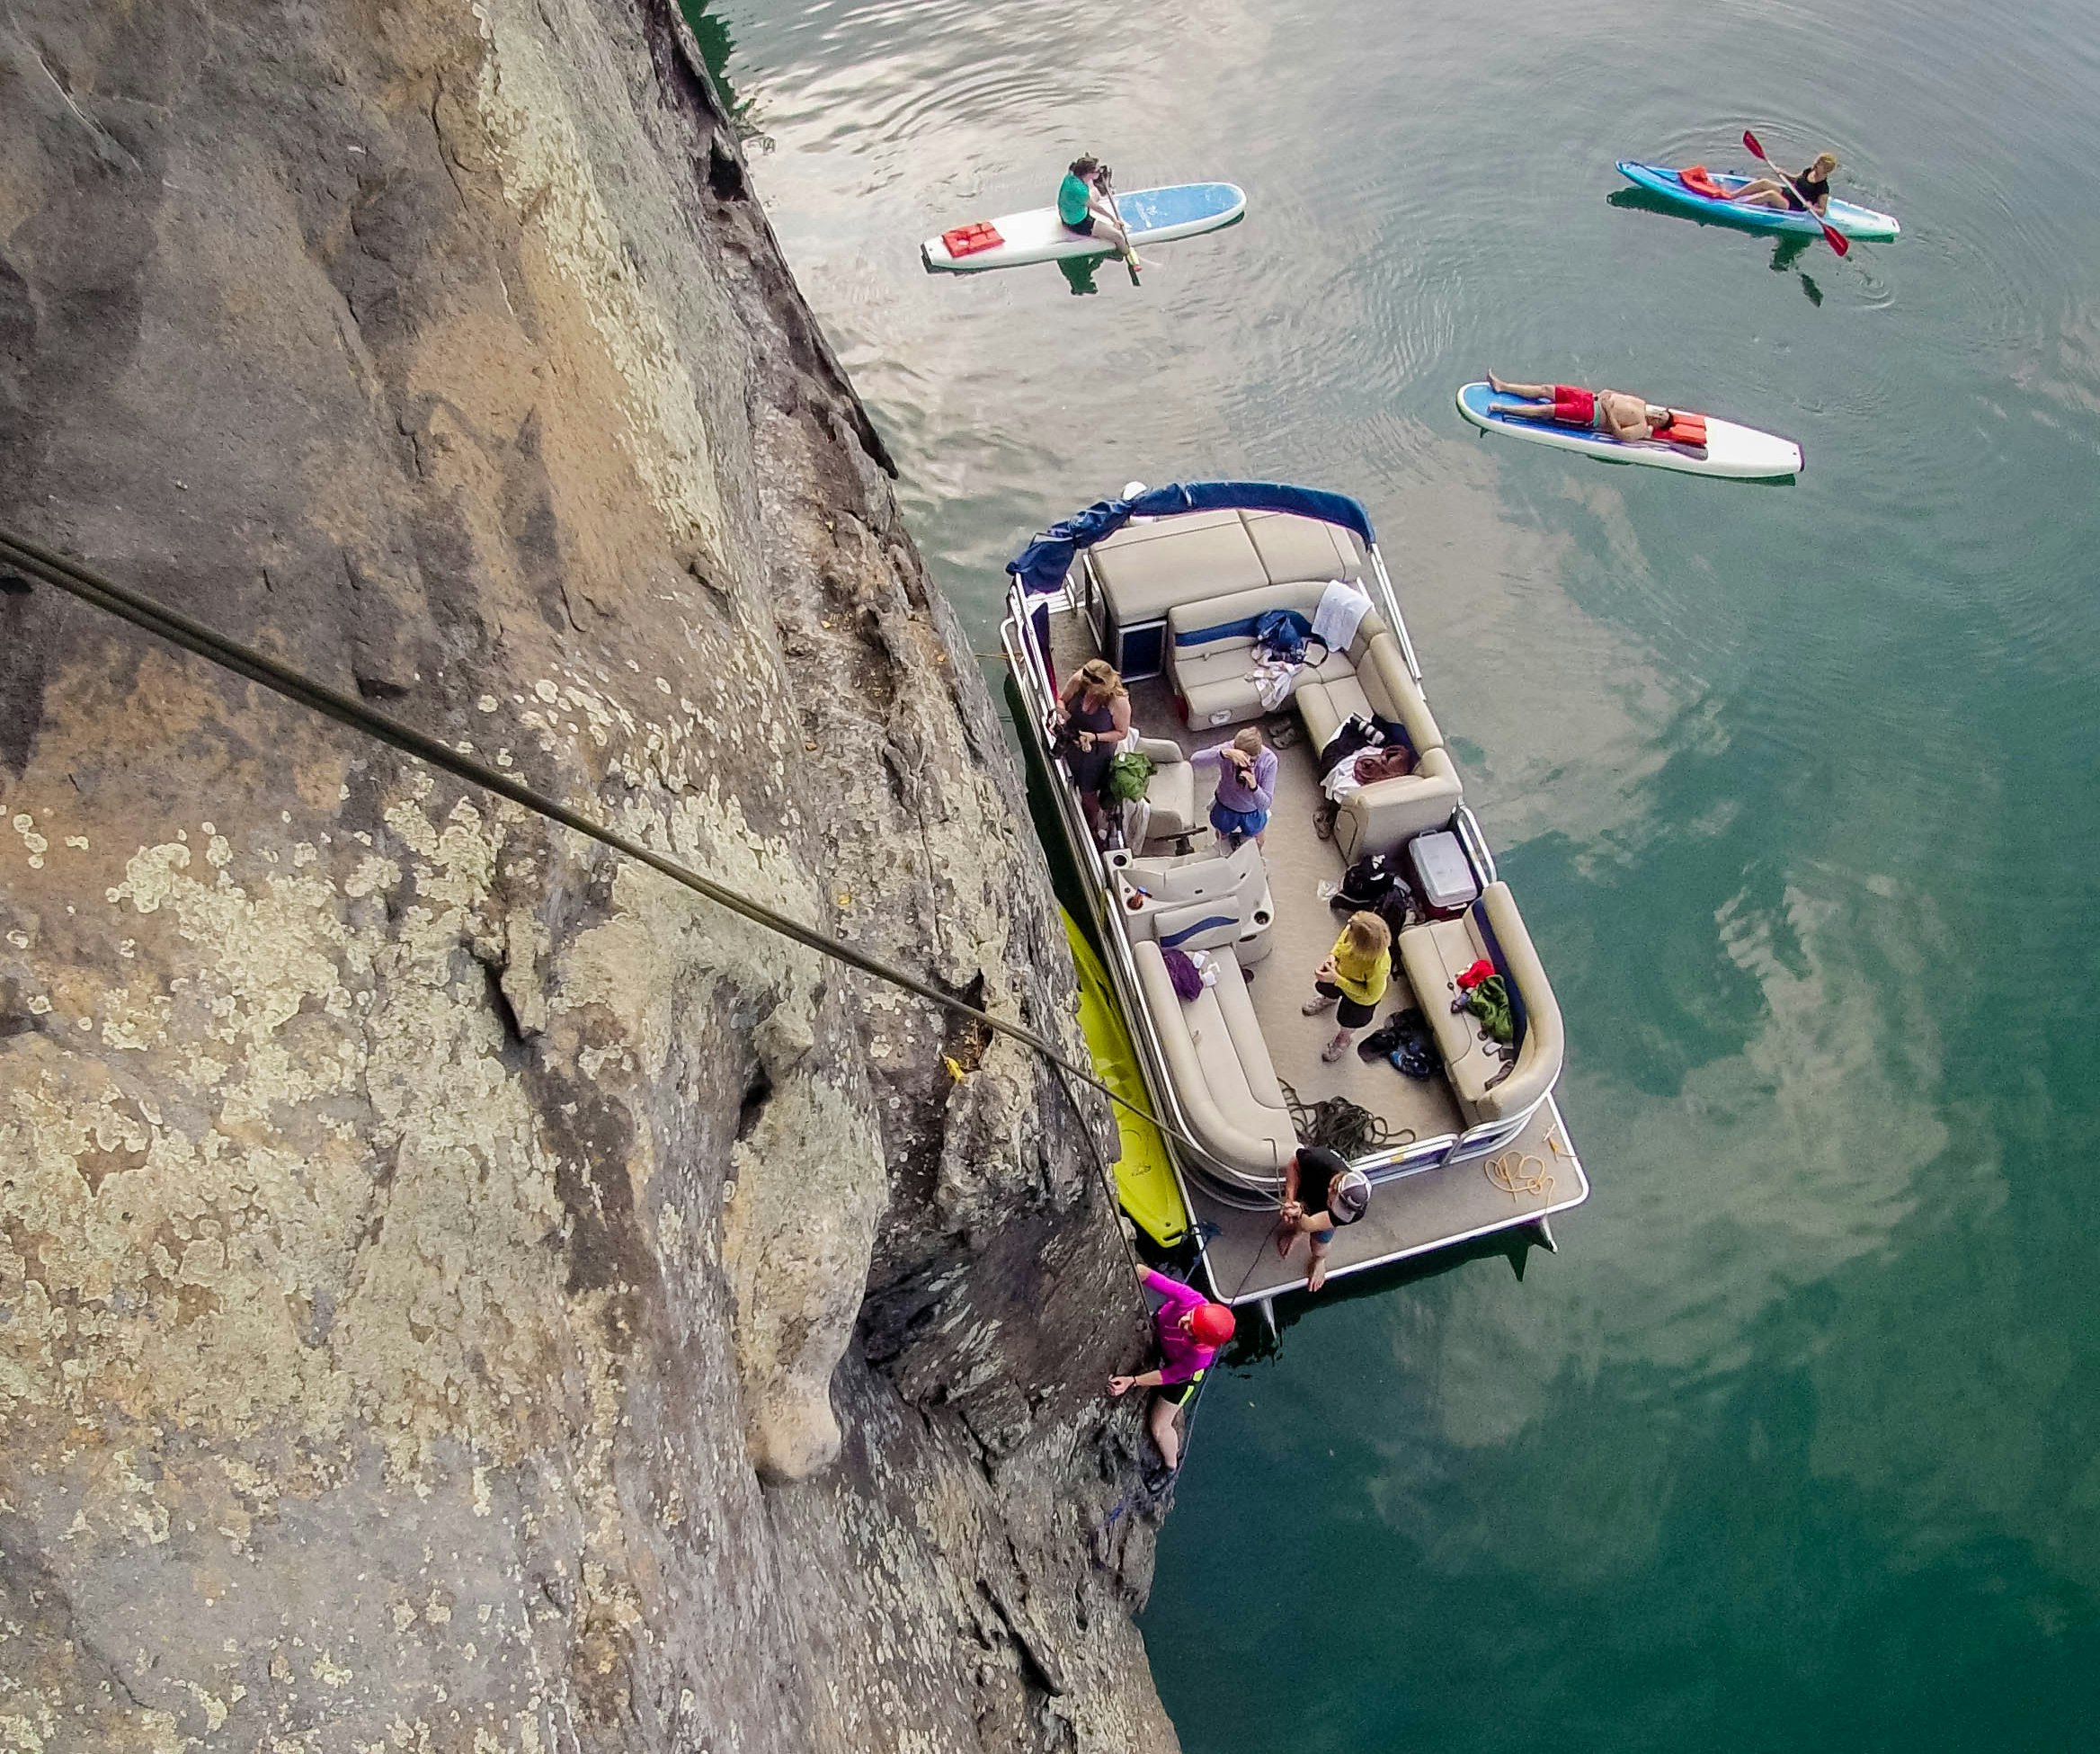 The camera is looking down on a boat which is next to a cliff face. A harness is hanging from the cliff, and a person climbing up the cliff face from the boat.